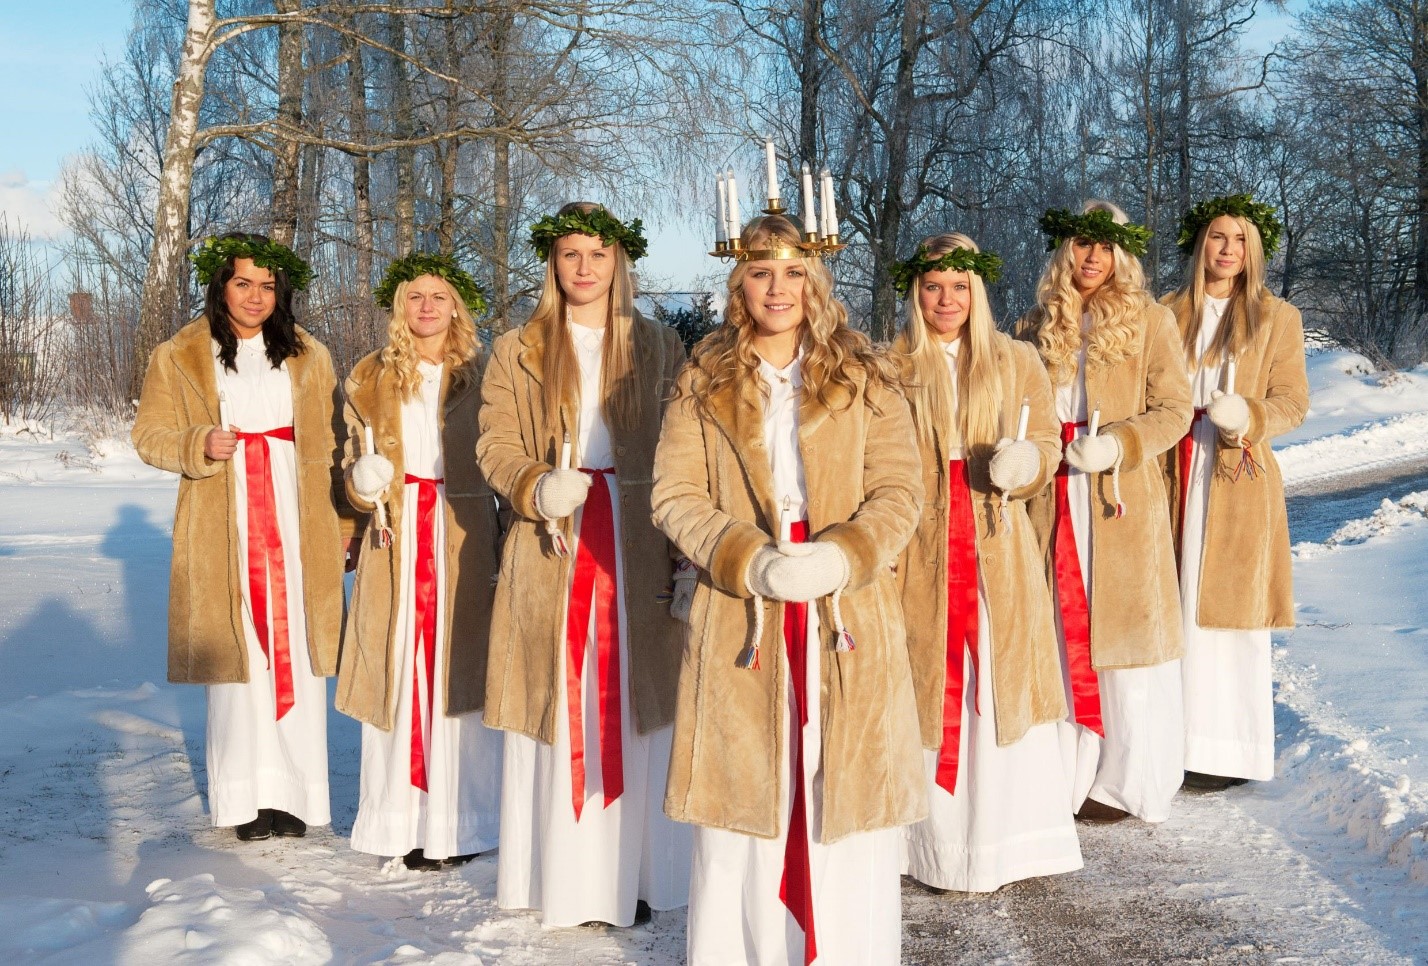 The Lucia tradition is as integral to Swedish culture as midsummer and crayfish parties. Immensely atmospheric, this 400-year-old custom brings peaceful joy each year on 13 December – and it’s spreading across the world. 